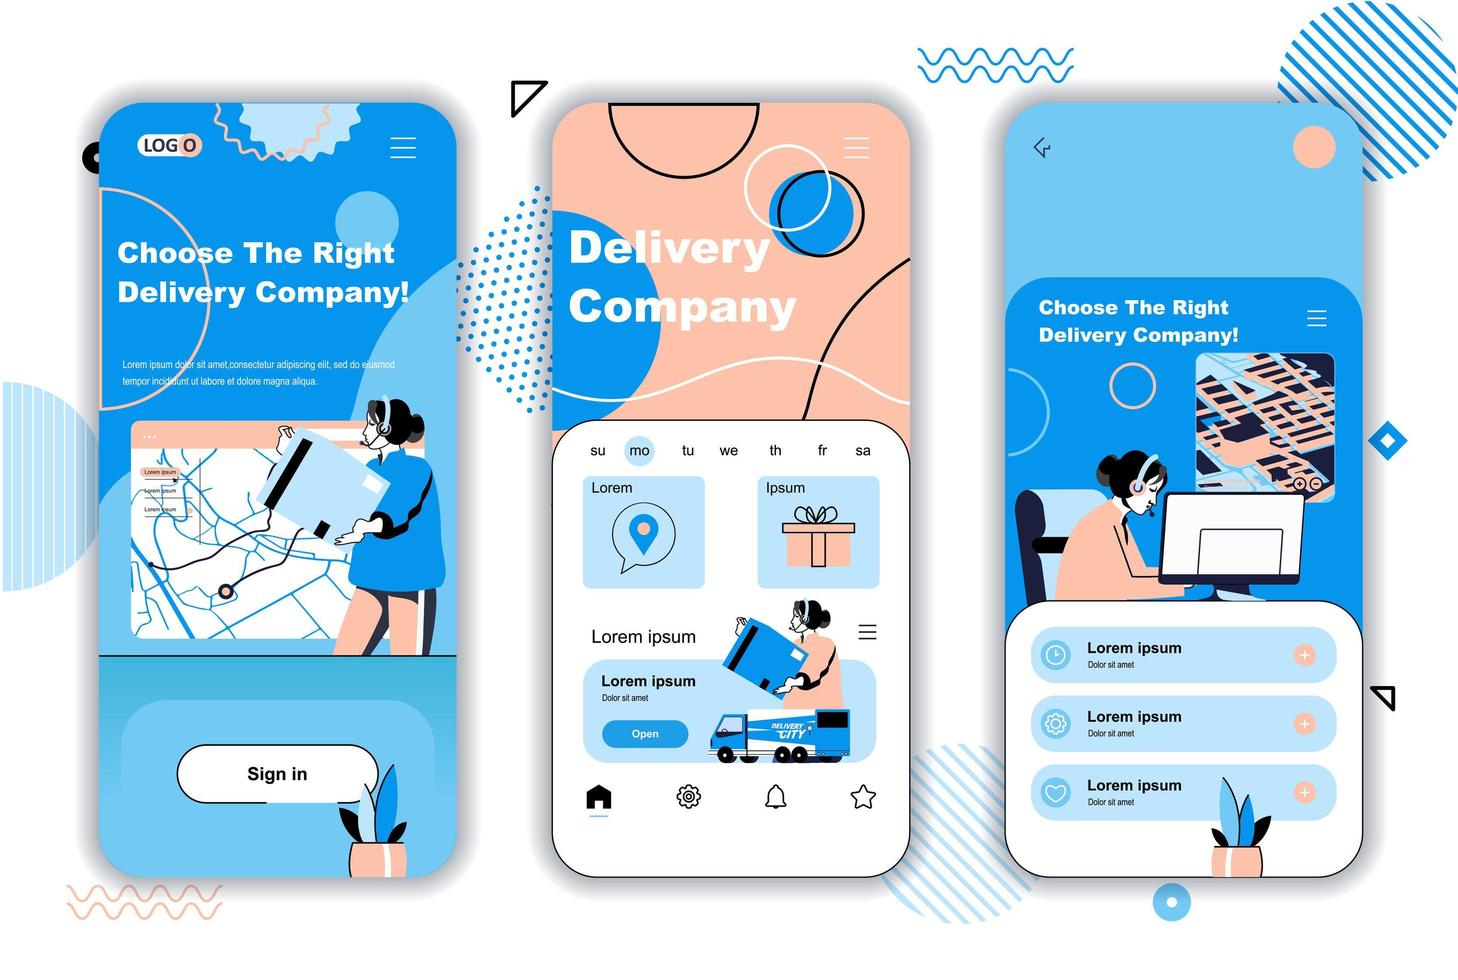 Delivery company concept onboarding screens for mobile app templates. Logistics, distribution and fast shipping. UI, UX, GUI user interface kit with people scenes for web design. Vector illustration